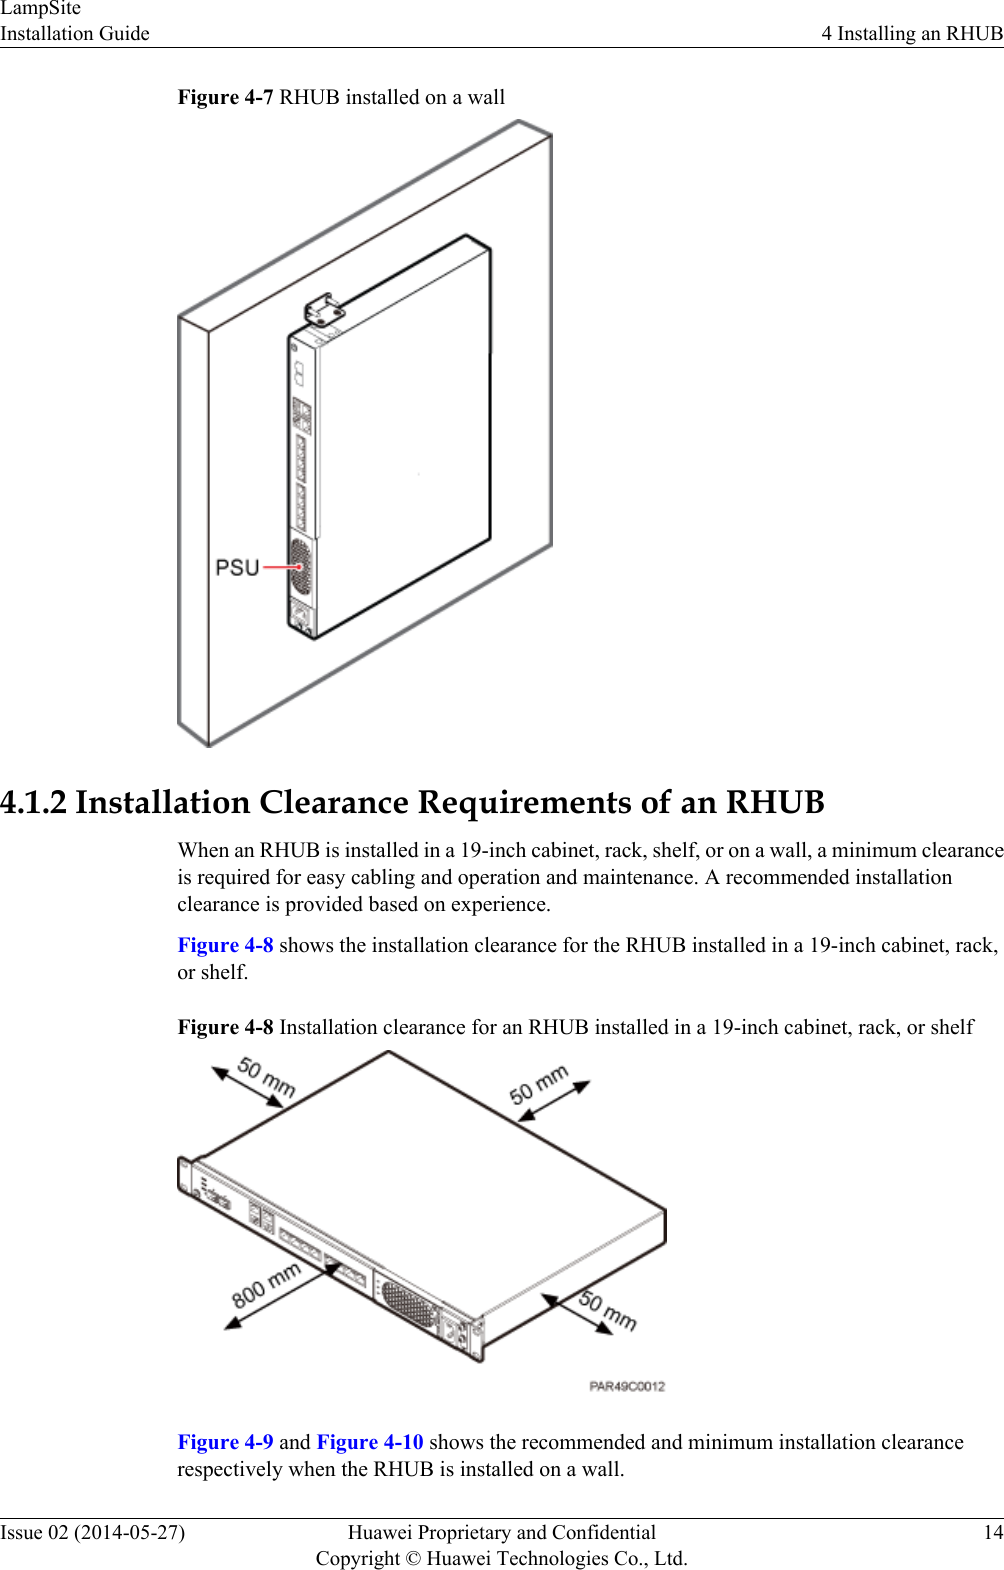 Figure 4-7 RHUB installed on a wall4.1.2 Installation Clearance Requirements of an RHUBWhen an RHUB is installed in a 19-inch cabinet, rack, shelf, or on a wall, a minimum clearanceis required for easy cabling and operation and maintenance. A recommended installationclearance is provided based on experience.Figure 4-8 shows the installation clearance for the RHUB installed in a 19-inch cabinet, rack,or shelf.Figure 4-8 Installation clearance for an RHUB installed in a 19-inch cabinet, rack, or shelfFigure 4-9 and Figure 4-10 shows the recommended and minimum installation clearancerespectively when the RHUB is installed on a wall.LampSiteInstallation Guide 4 Installing an RHUBIssue 02 (2014-05-27) Huawei Proprietary and ConfidentialCopyright © Huawei Technologies Co., Ltd.14